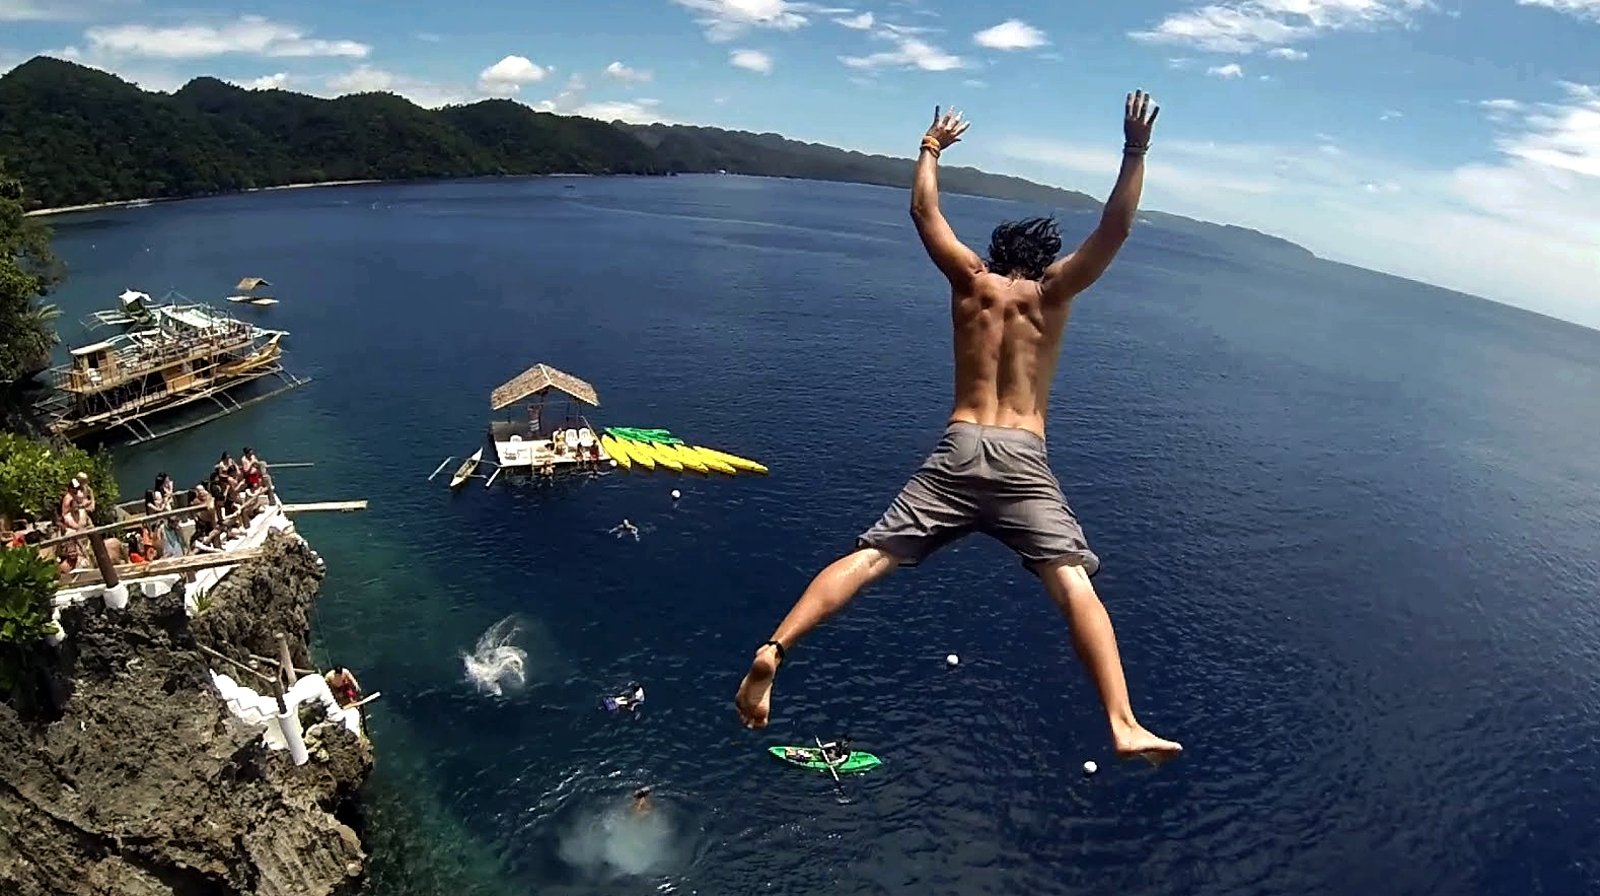 How to jump from a rock into the water on Panay